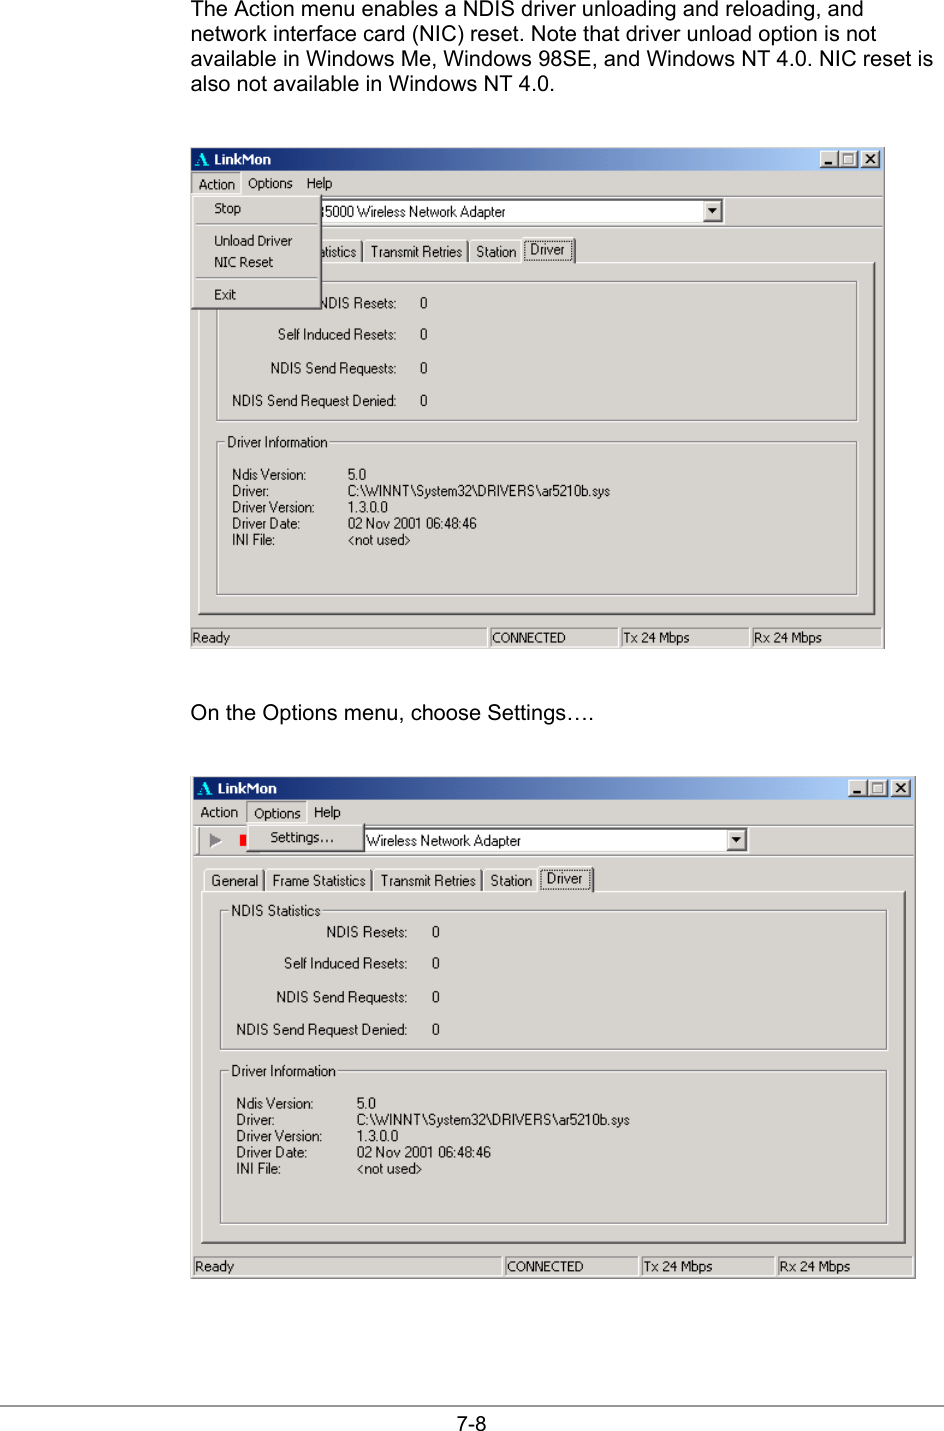  7-8 The Action menu enables a NDIS driver unloading and reloading, and network interface card (NIC) reset. Note that driver unload option is not available in Windows Me, Windows 98SE, and Windows NT 4.0. NIC reset is also not available in Windows NT 4.0.   On the Options menu, choose Settings….   